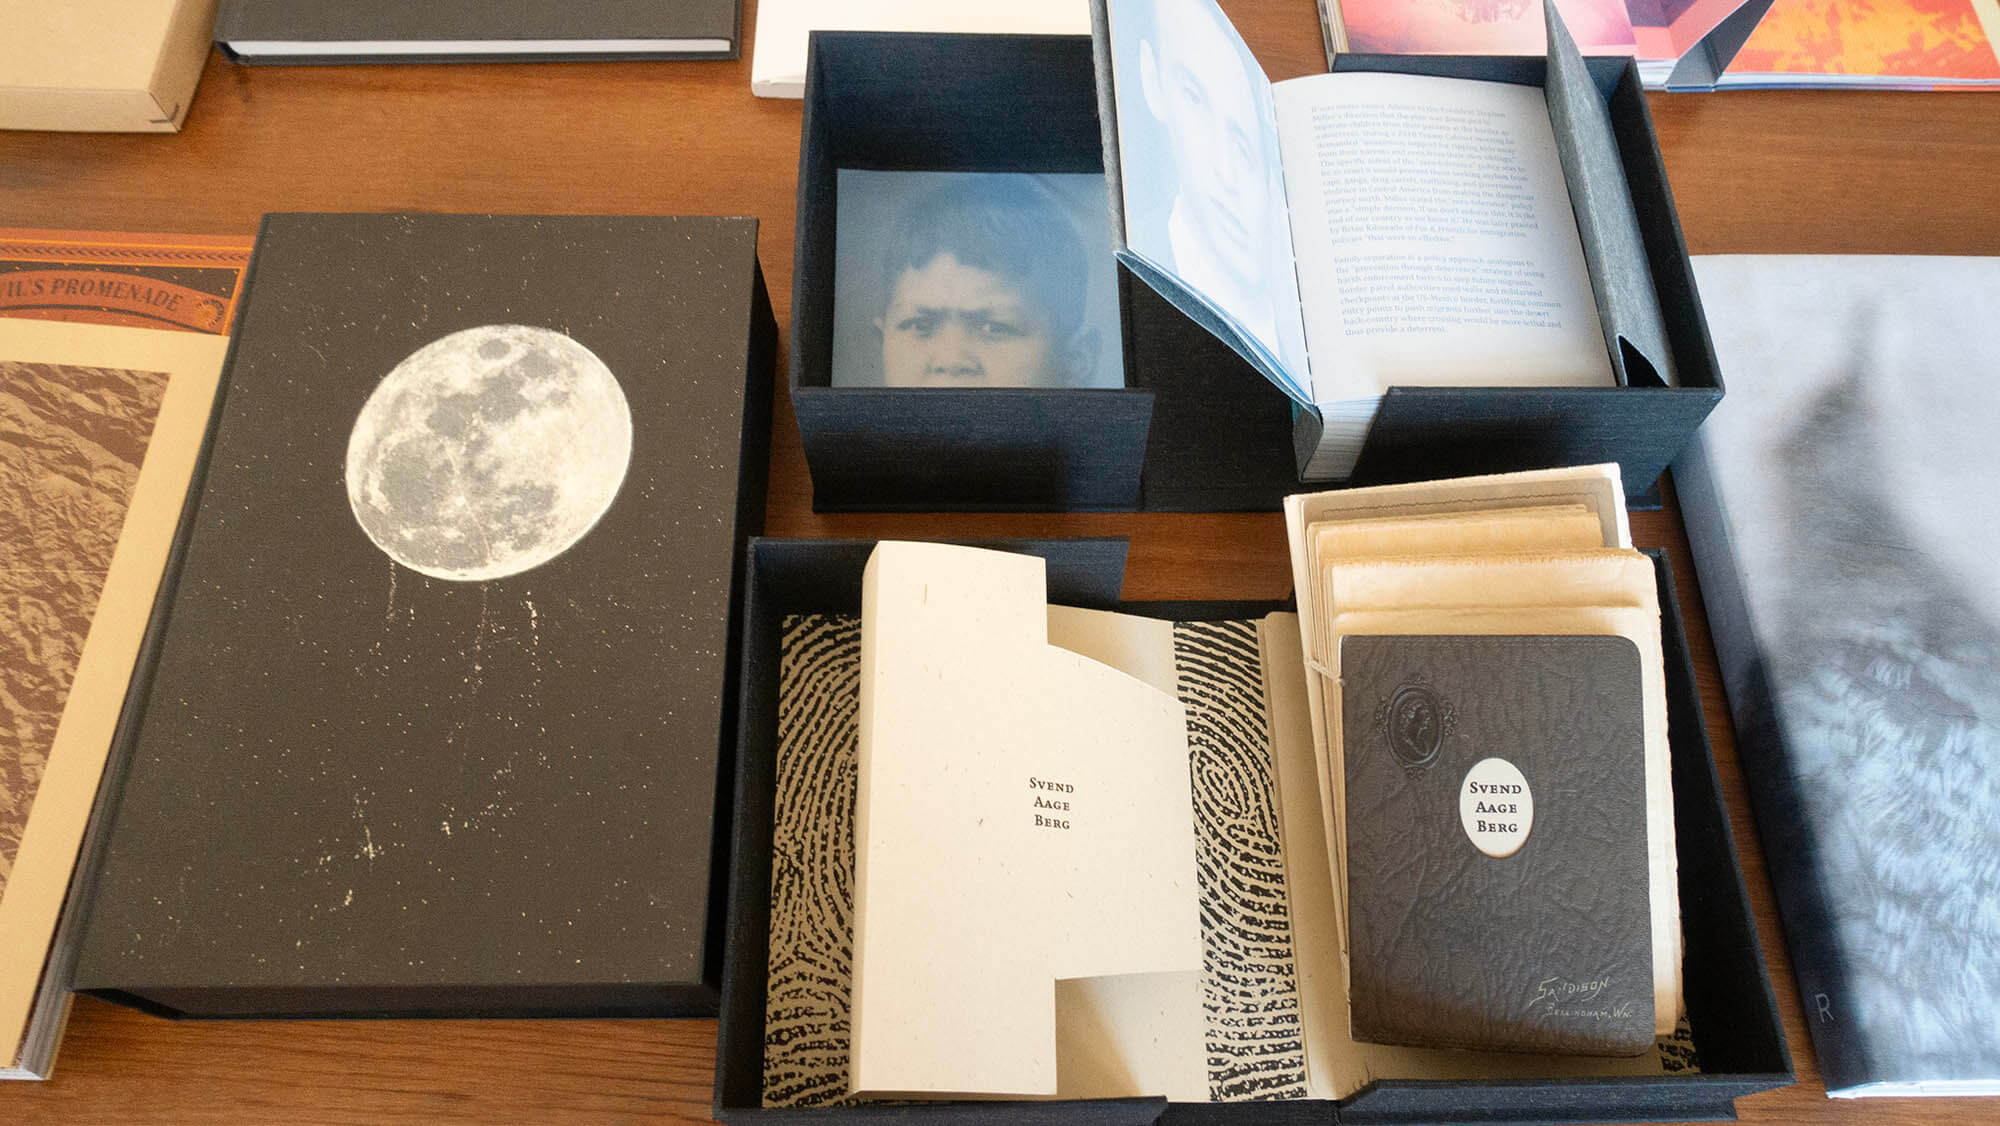 Center image, Lower row of books, clockwise from left: a. “DESIRE LINES” by Lara Shipley, Overlapse, 2023 b. “I’LL BE LOOKING AT THE MOON, BUT I’LL BE SEEING YOU” by Hari Katragadda and Shweta Upadhyah, ed. 500 c. Top: “JUST 545 KIDS” by Elsi Vassdal Ellis, hand-made artists’ book (variable ed. 15) d. Top: “JUST 245 KIDS”, below: “SVEND AAGE BERG” both by Else Vassdal Ellis e. “SENSE” by Ann Hamilton, Radius Books (2022).